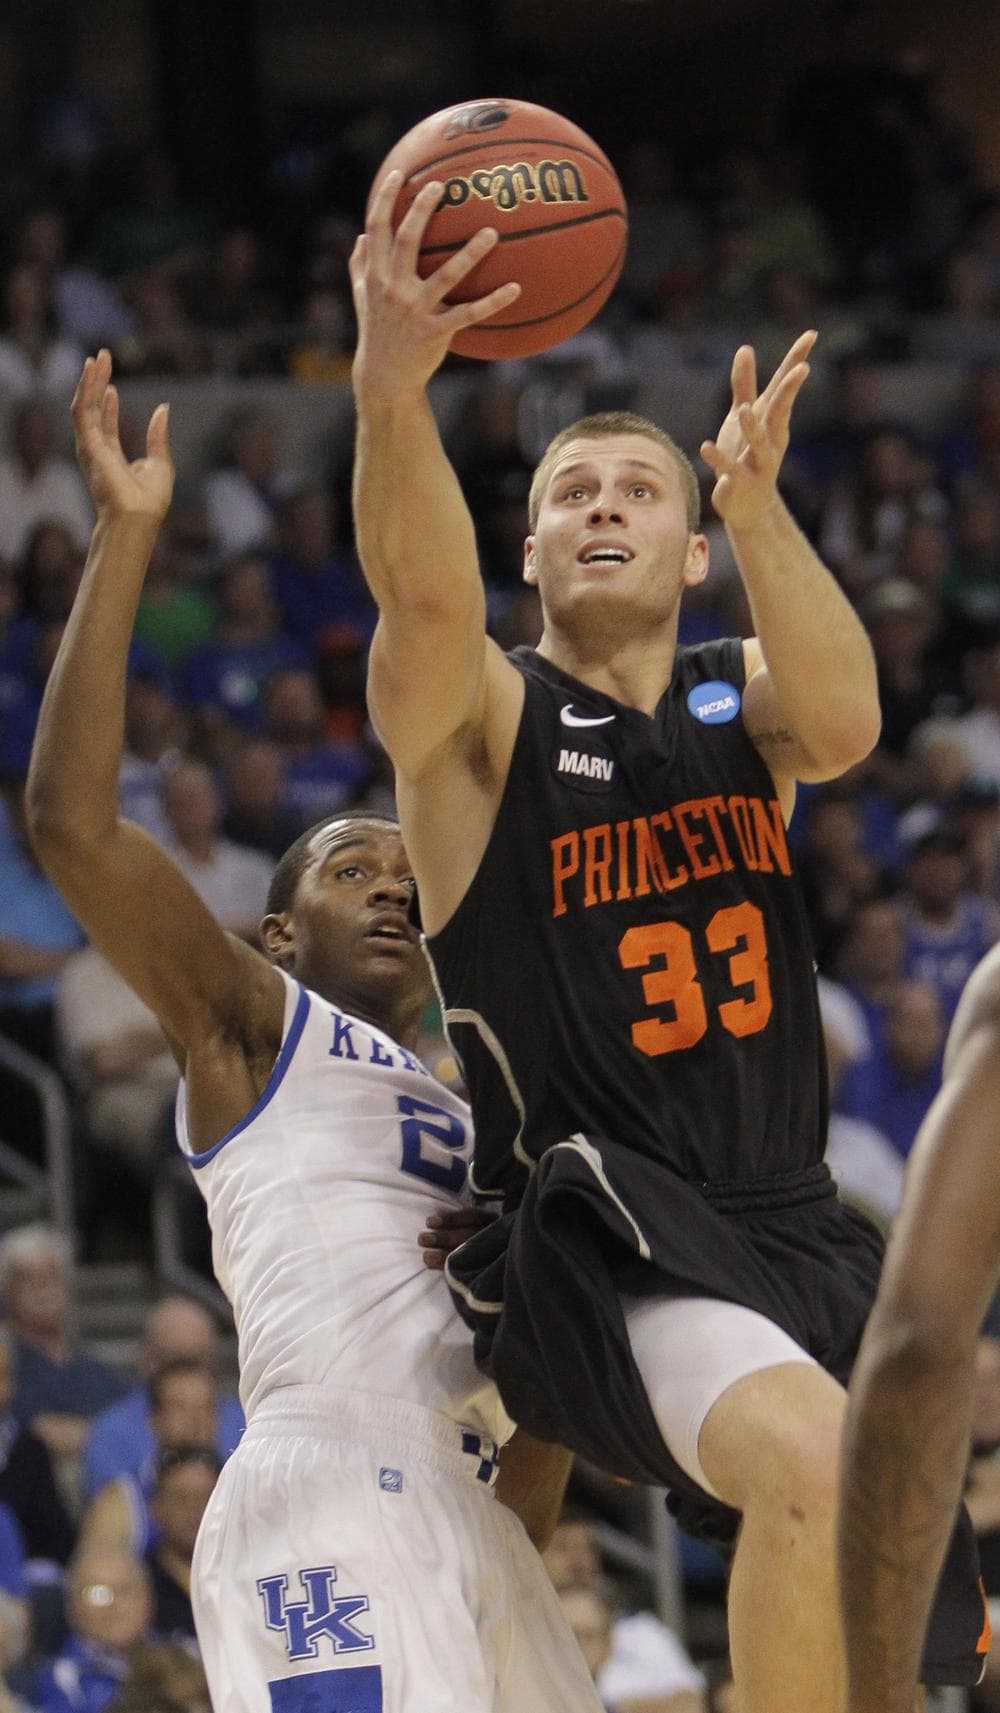 Princeton (13) gave Kentucky (4) a run for their money, but in the end the Ivy League champs fell short in the final seconds. (AP)